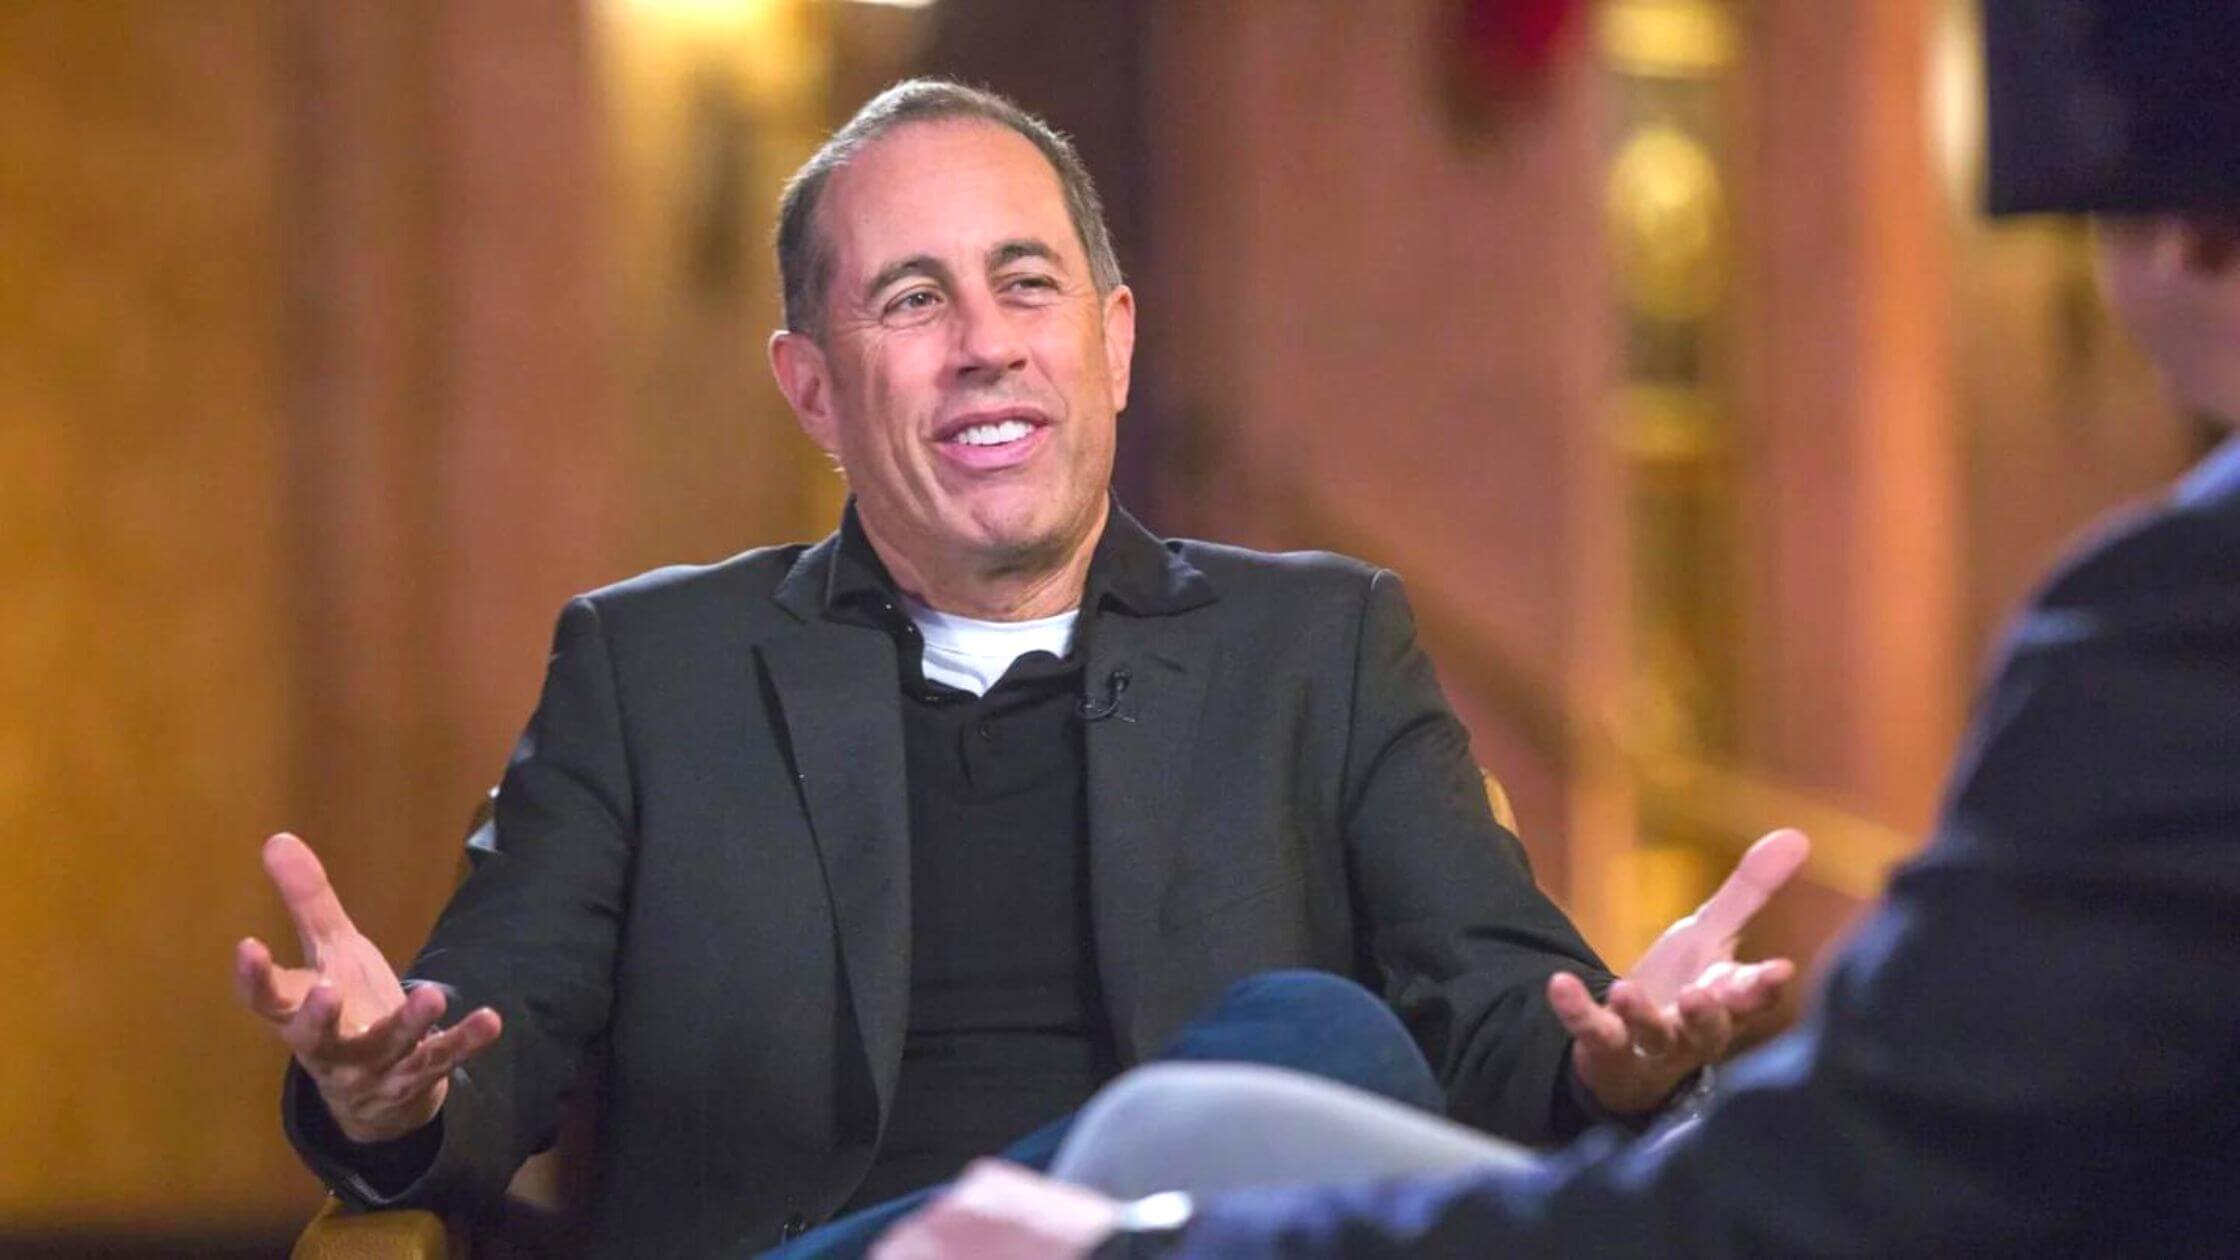 Jerry Seinfeld's Life Story, One Of The Best In America As A Comedian